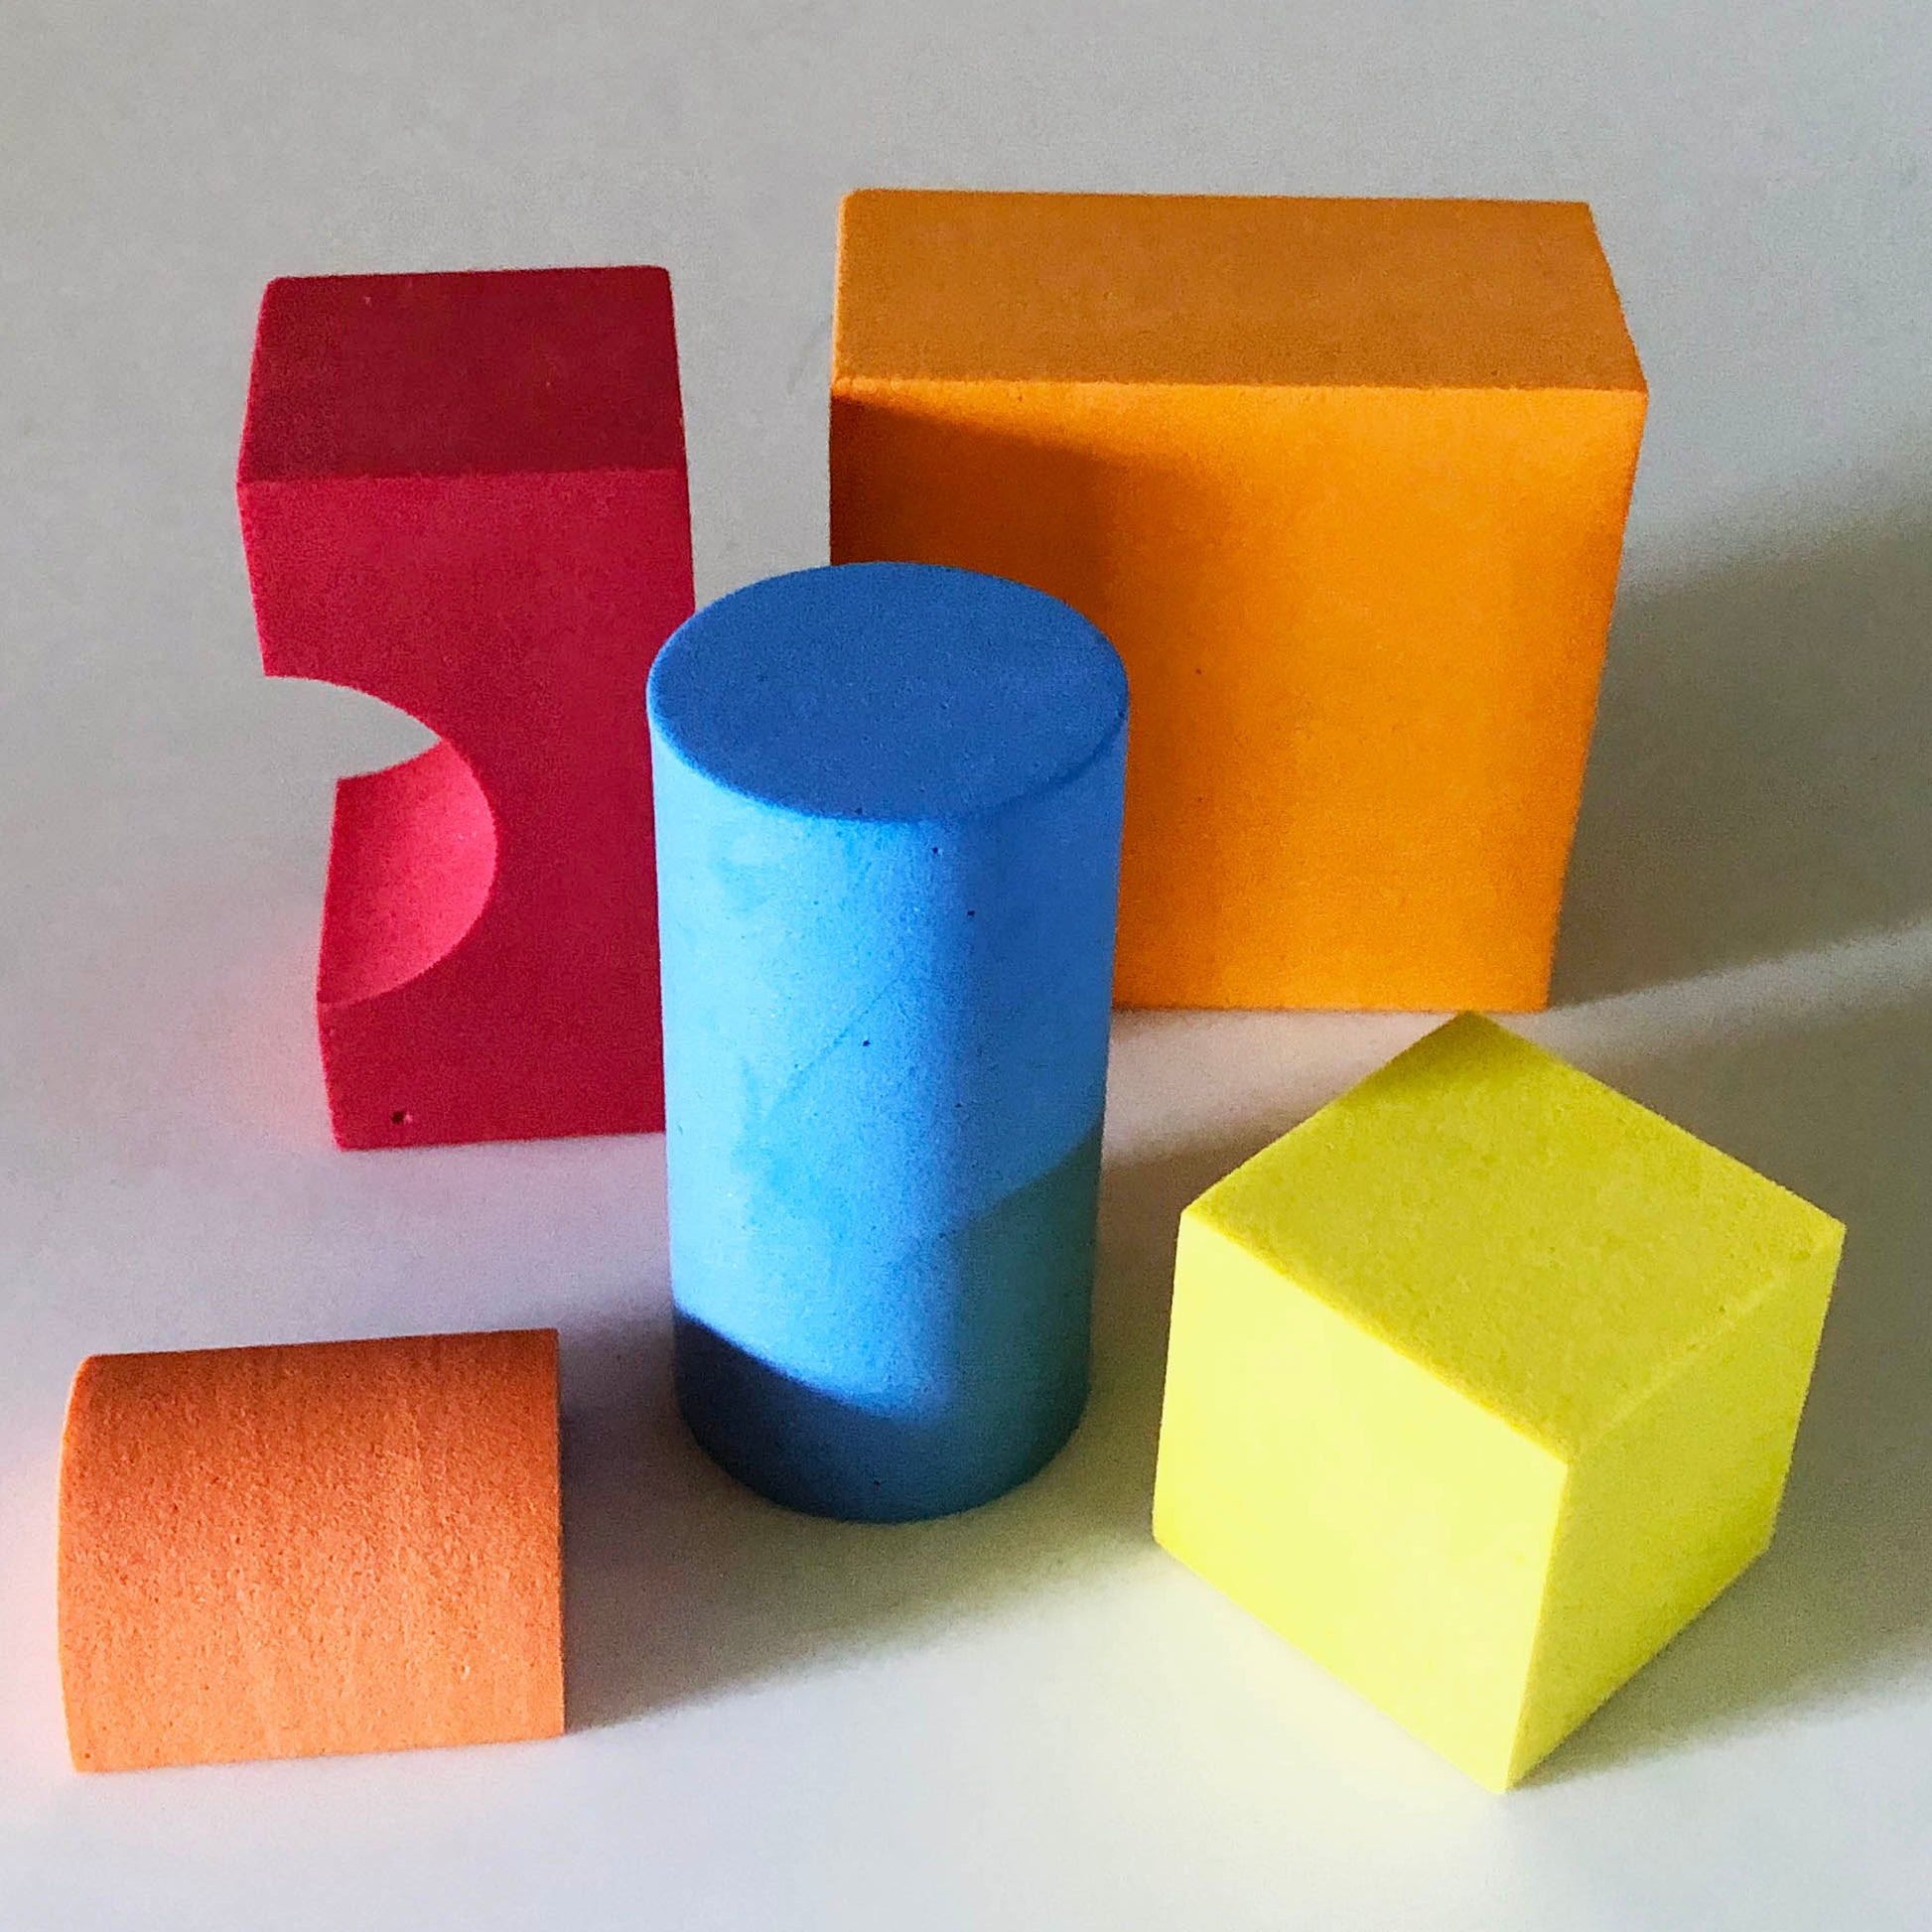 Odd shaped and colored foam blocks including: Red arch, orange shape with a square face and rectangle top, blue cylinder, orange small half cylinder and yellow square cube